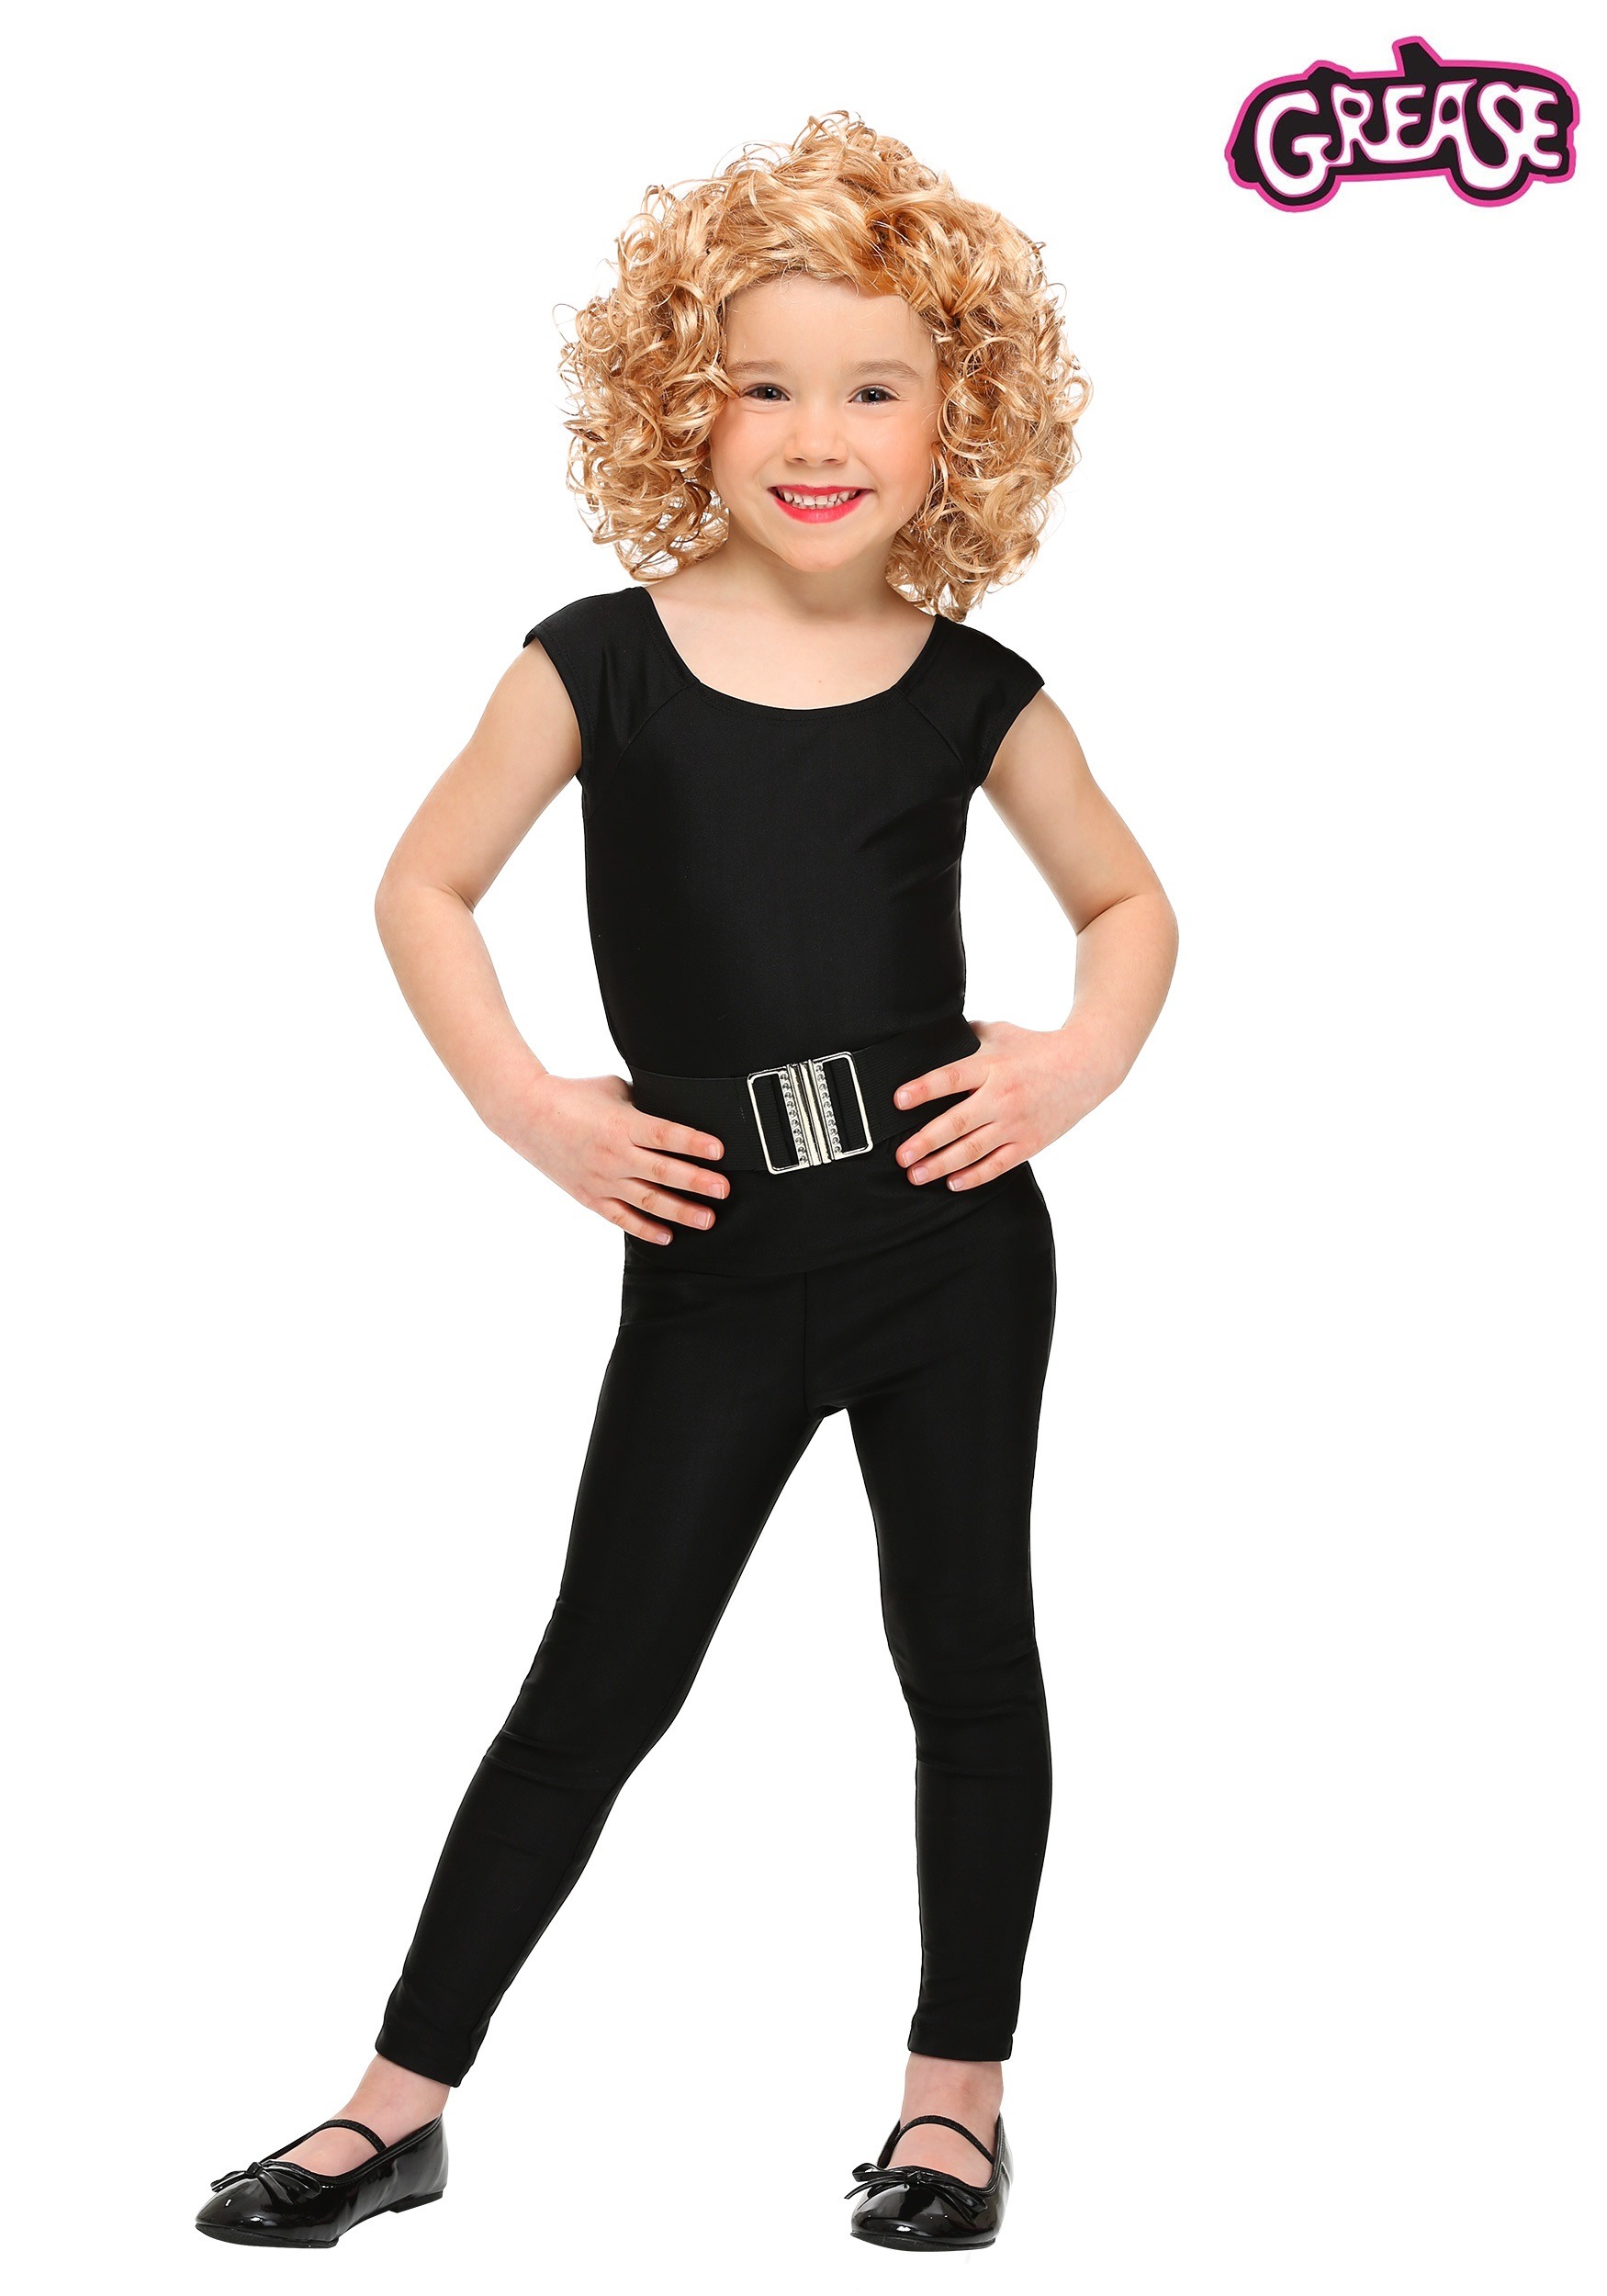 Toddler Grease Sandy Costume - image 3 of 3